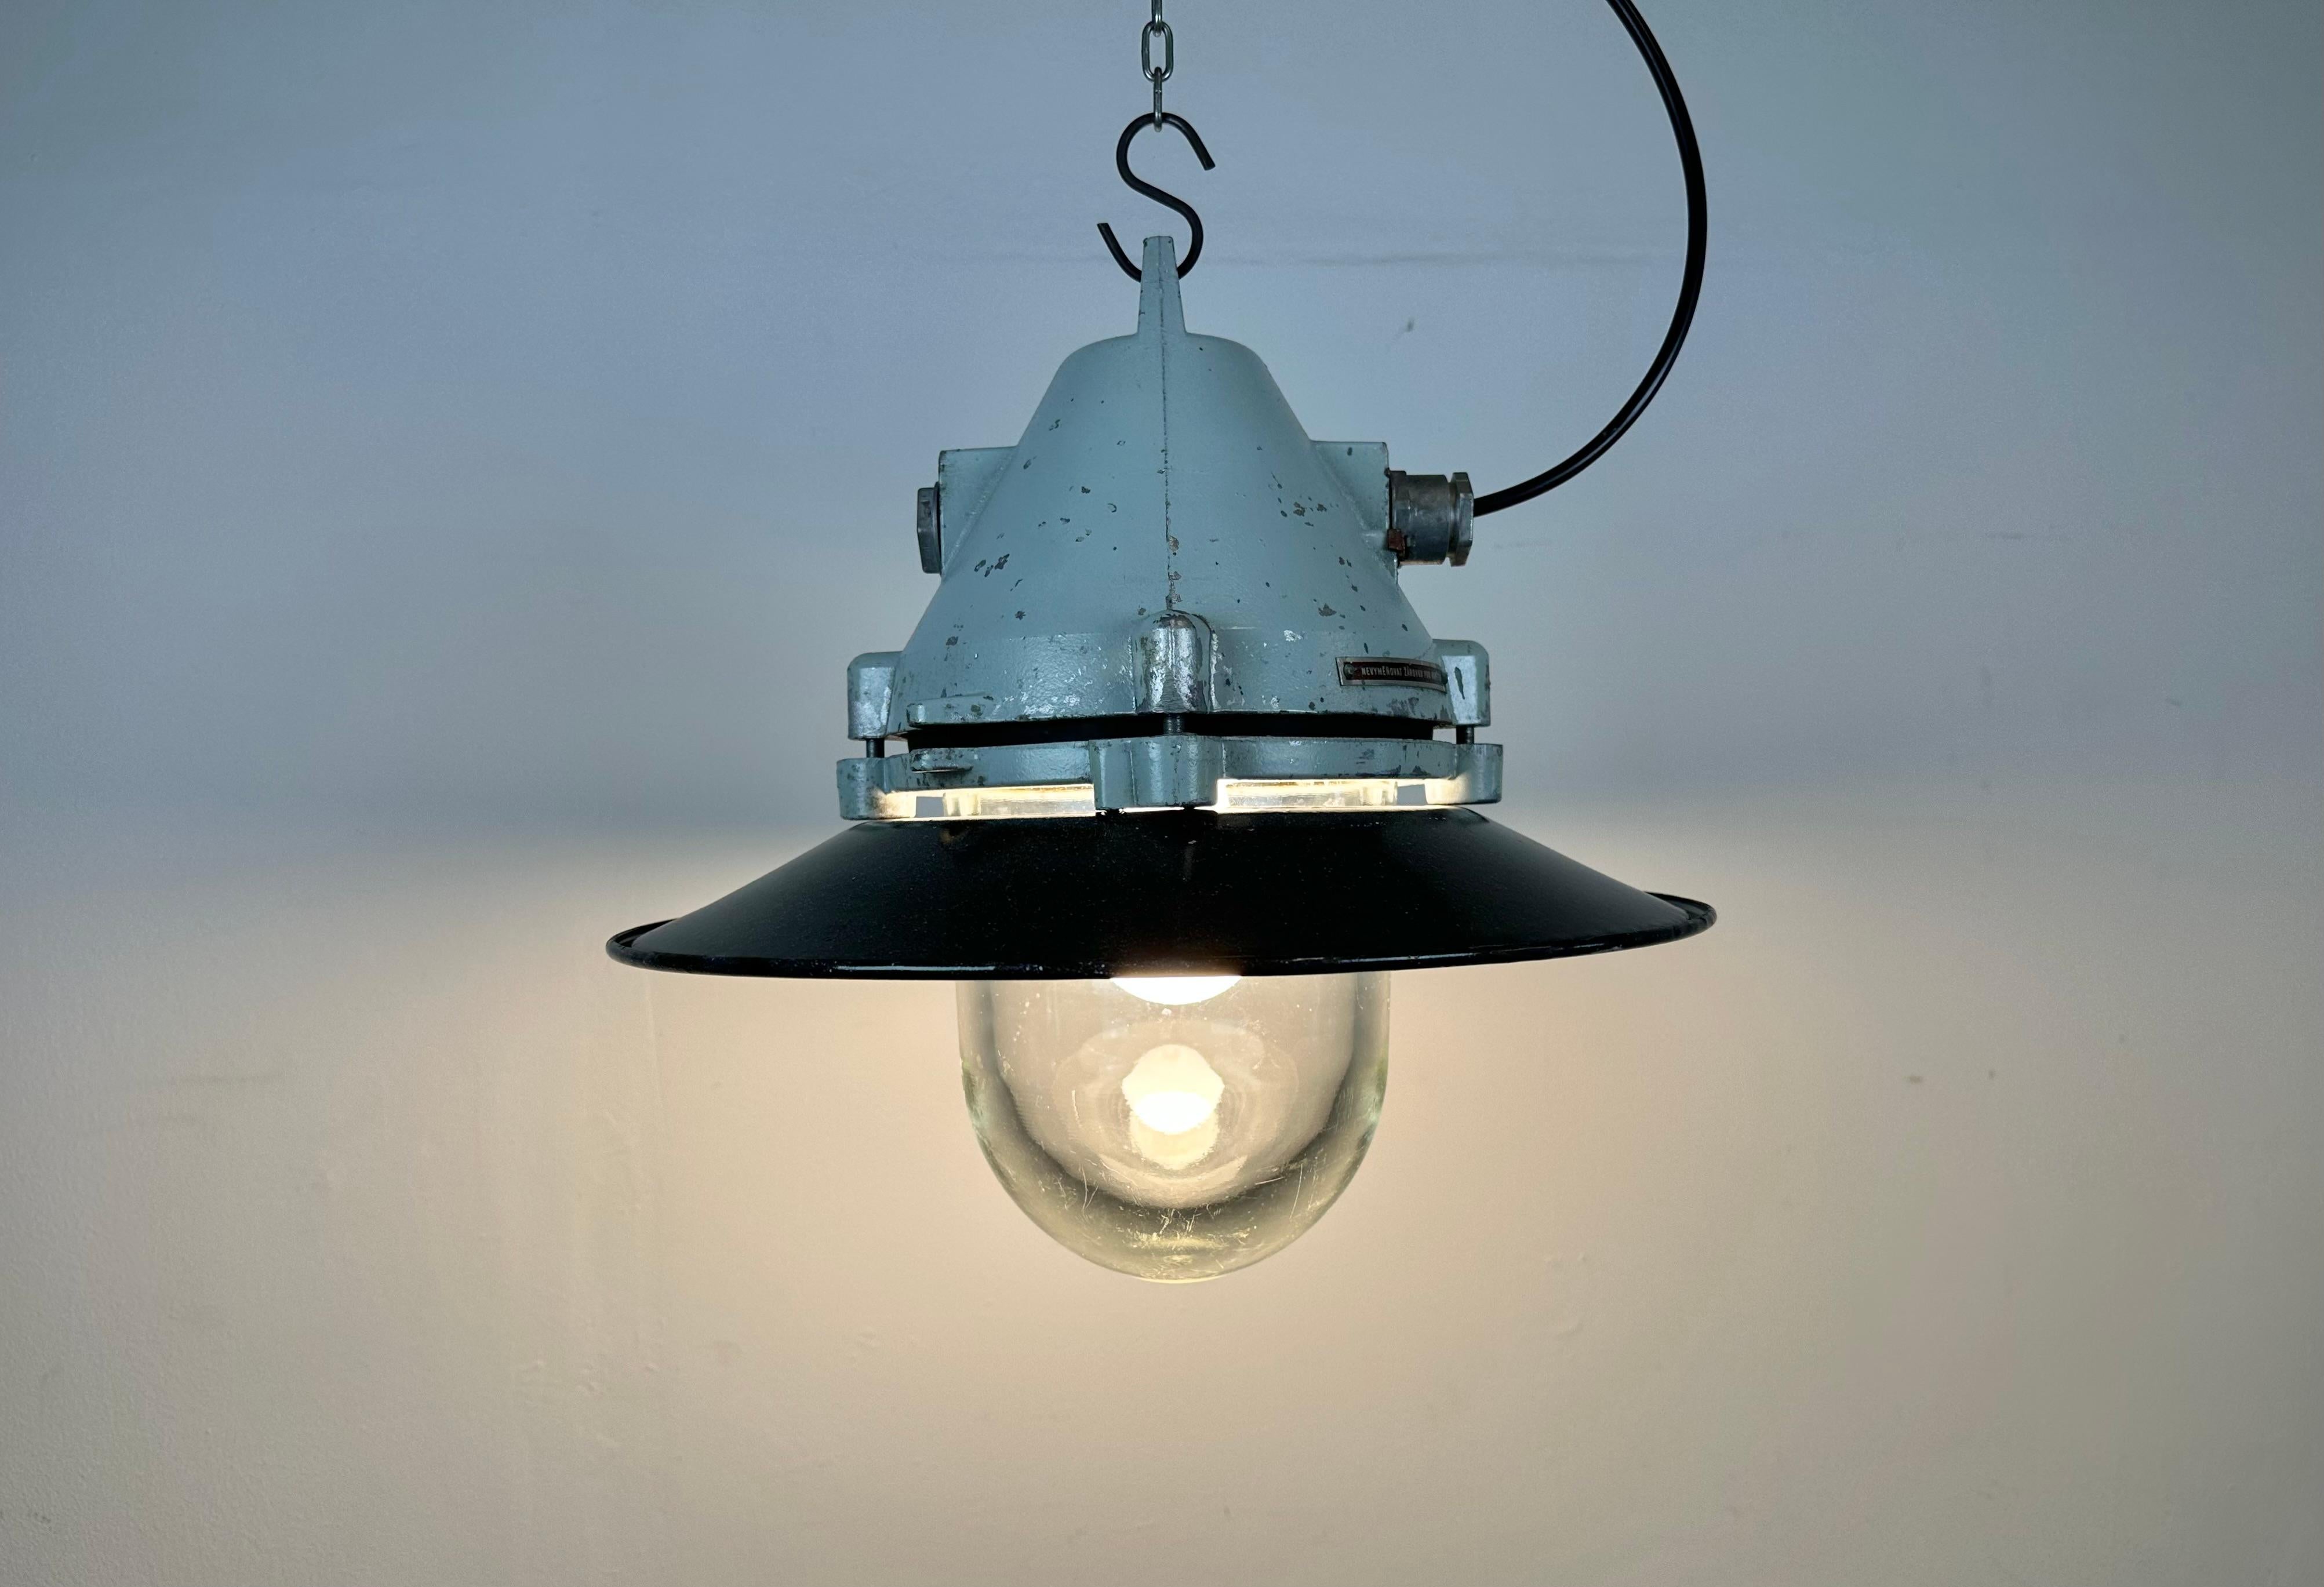 Grey Cast Aluminium Explosion Proof Lamp with Enameled Shade, 1970s For Sale 5